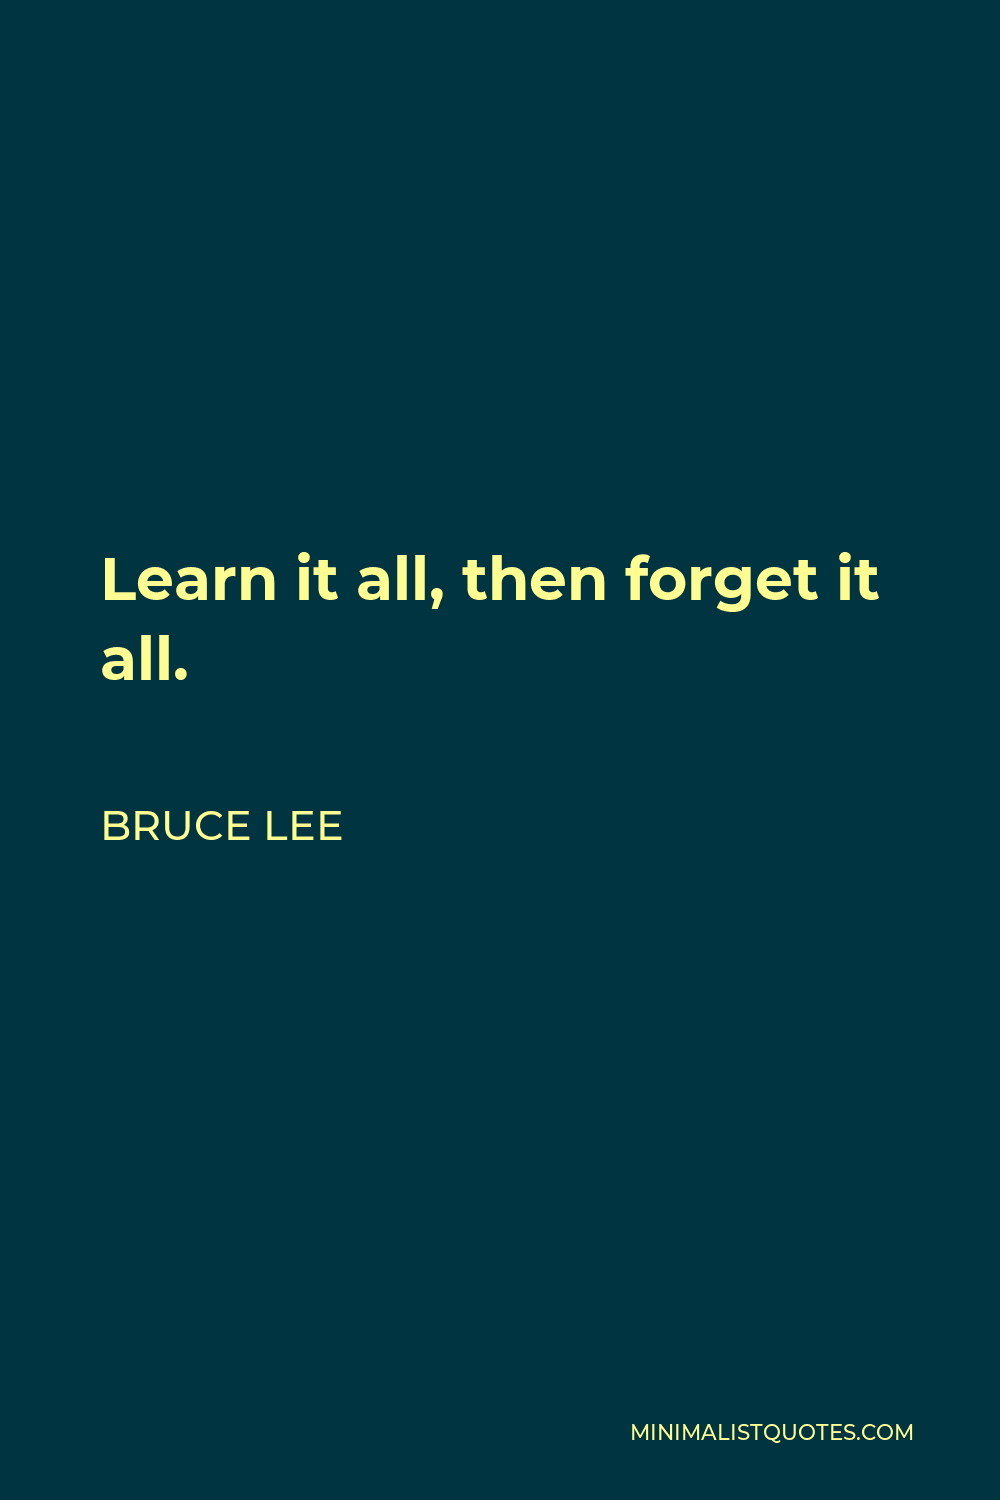 Bruce Lee Quote - Learn it all, then forget it all.